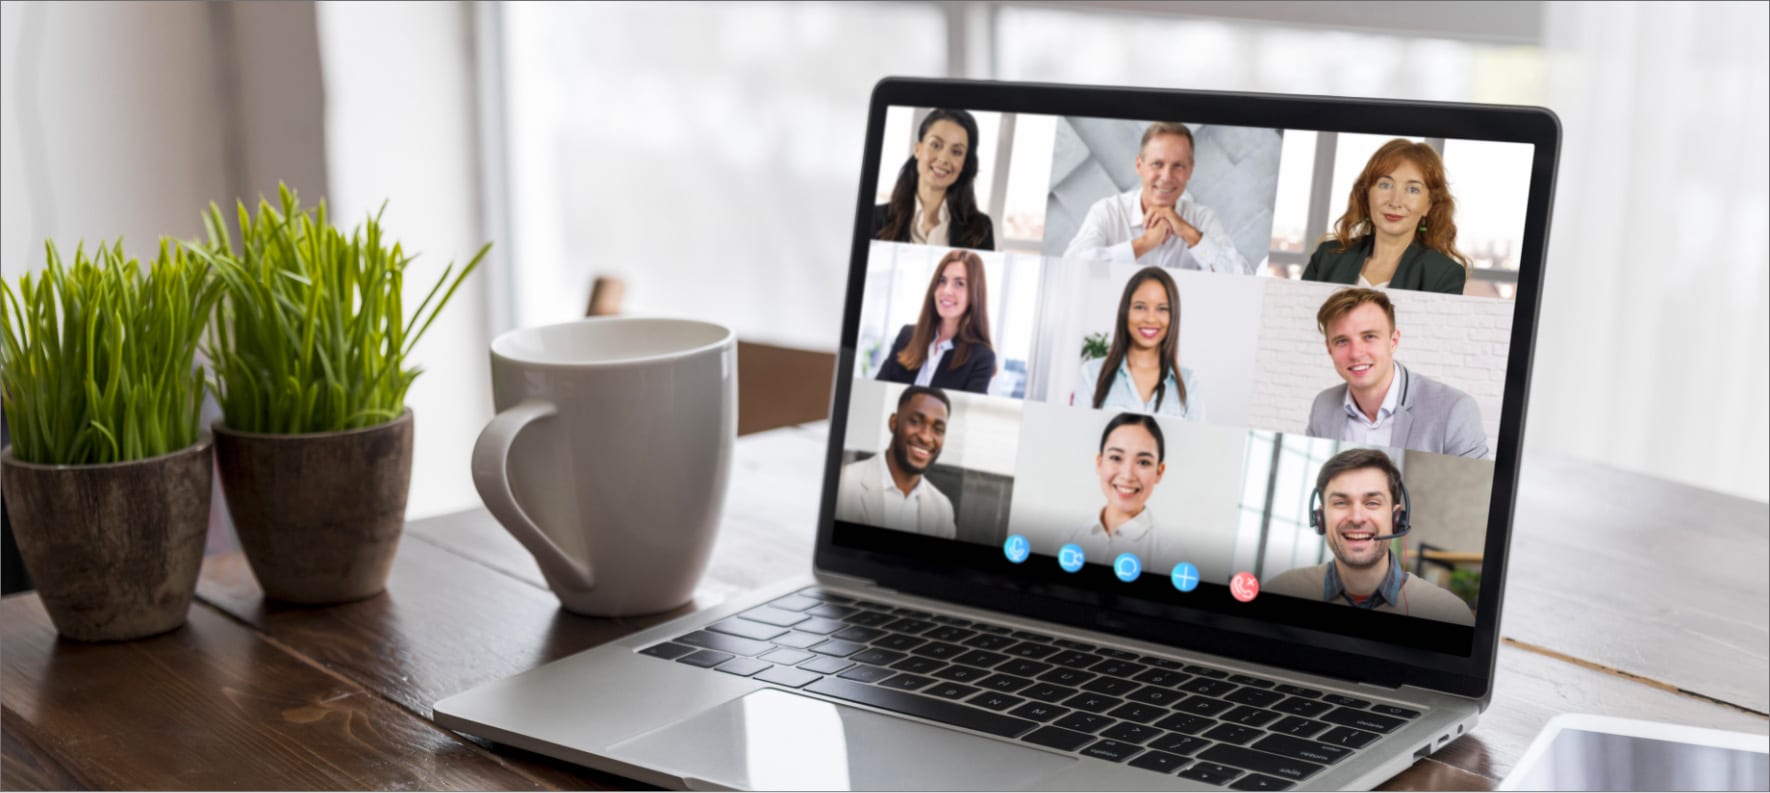 Video Chat for Customer Service sees 70% growth in Europe